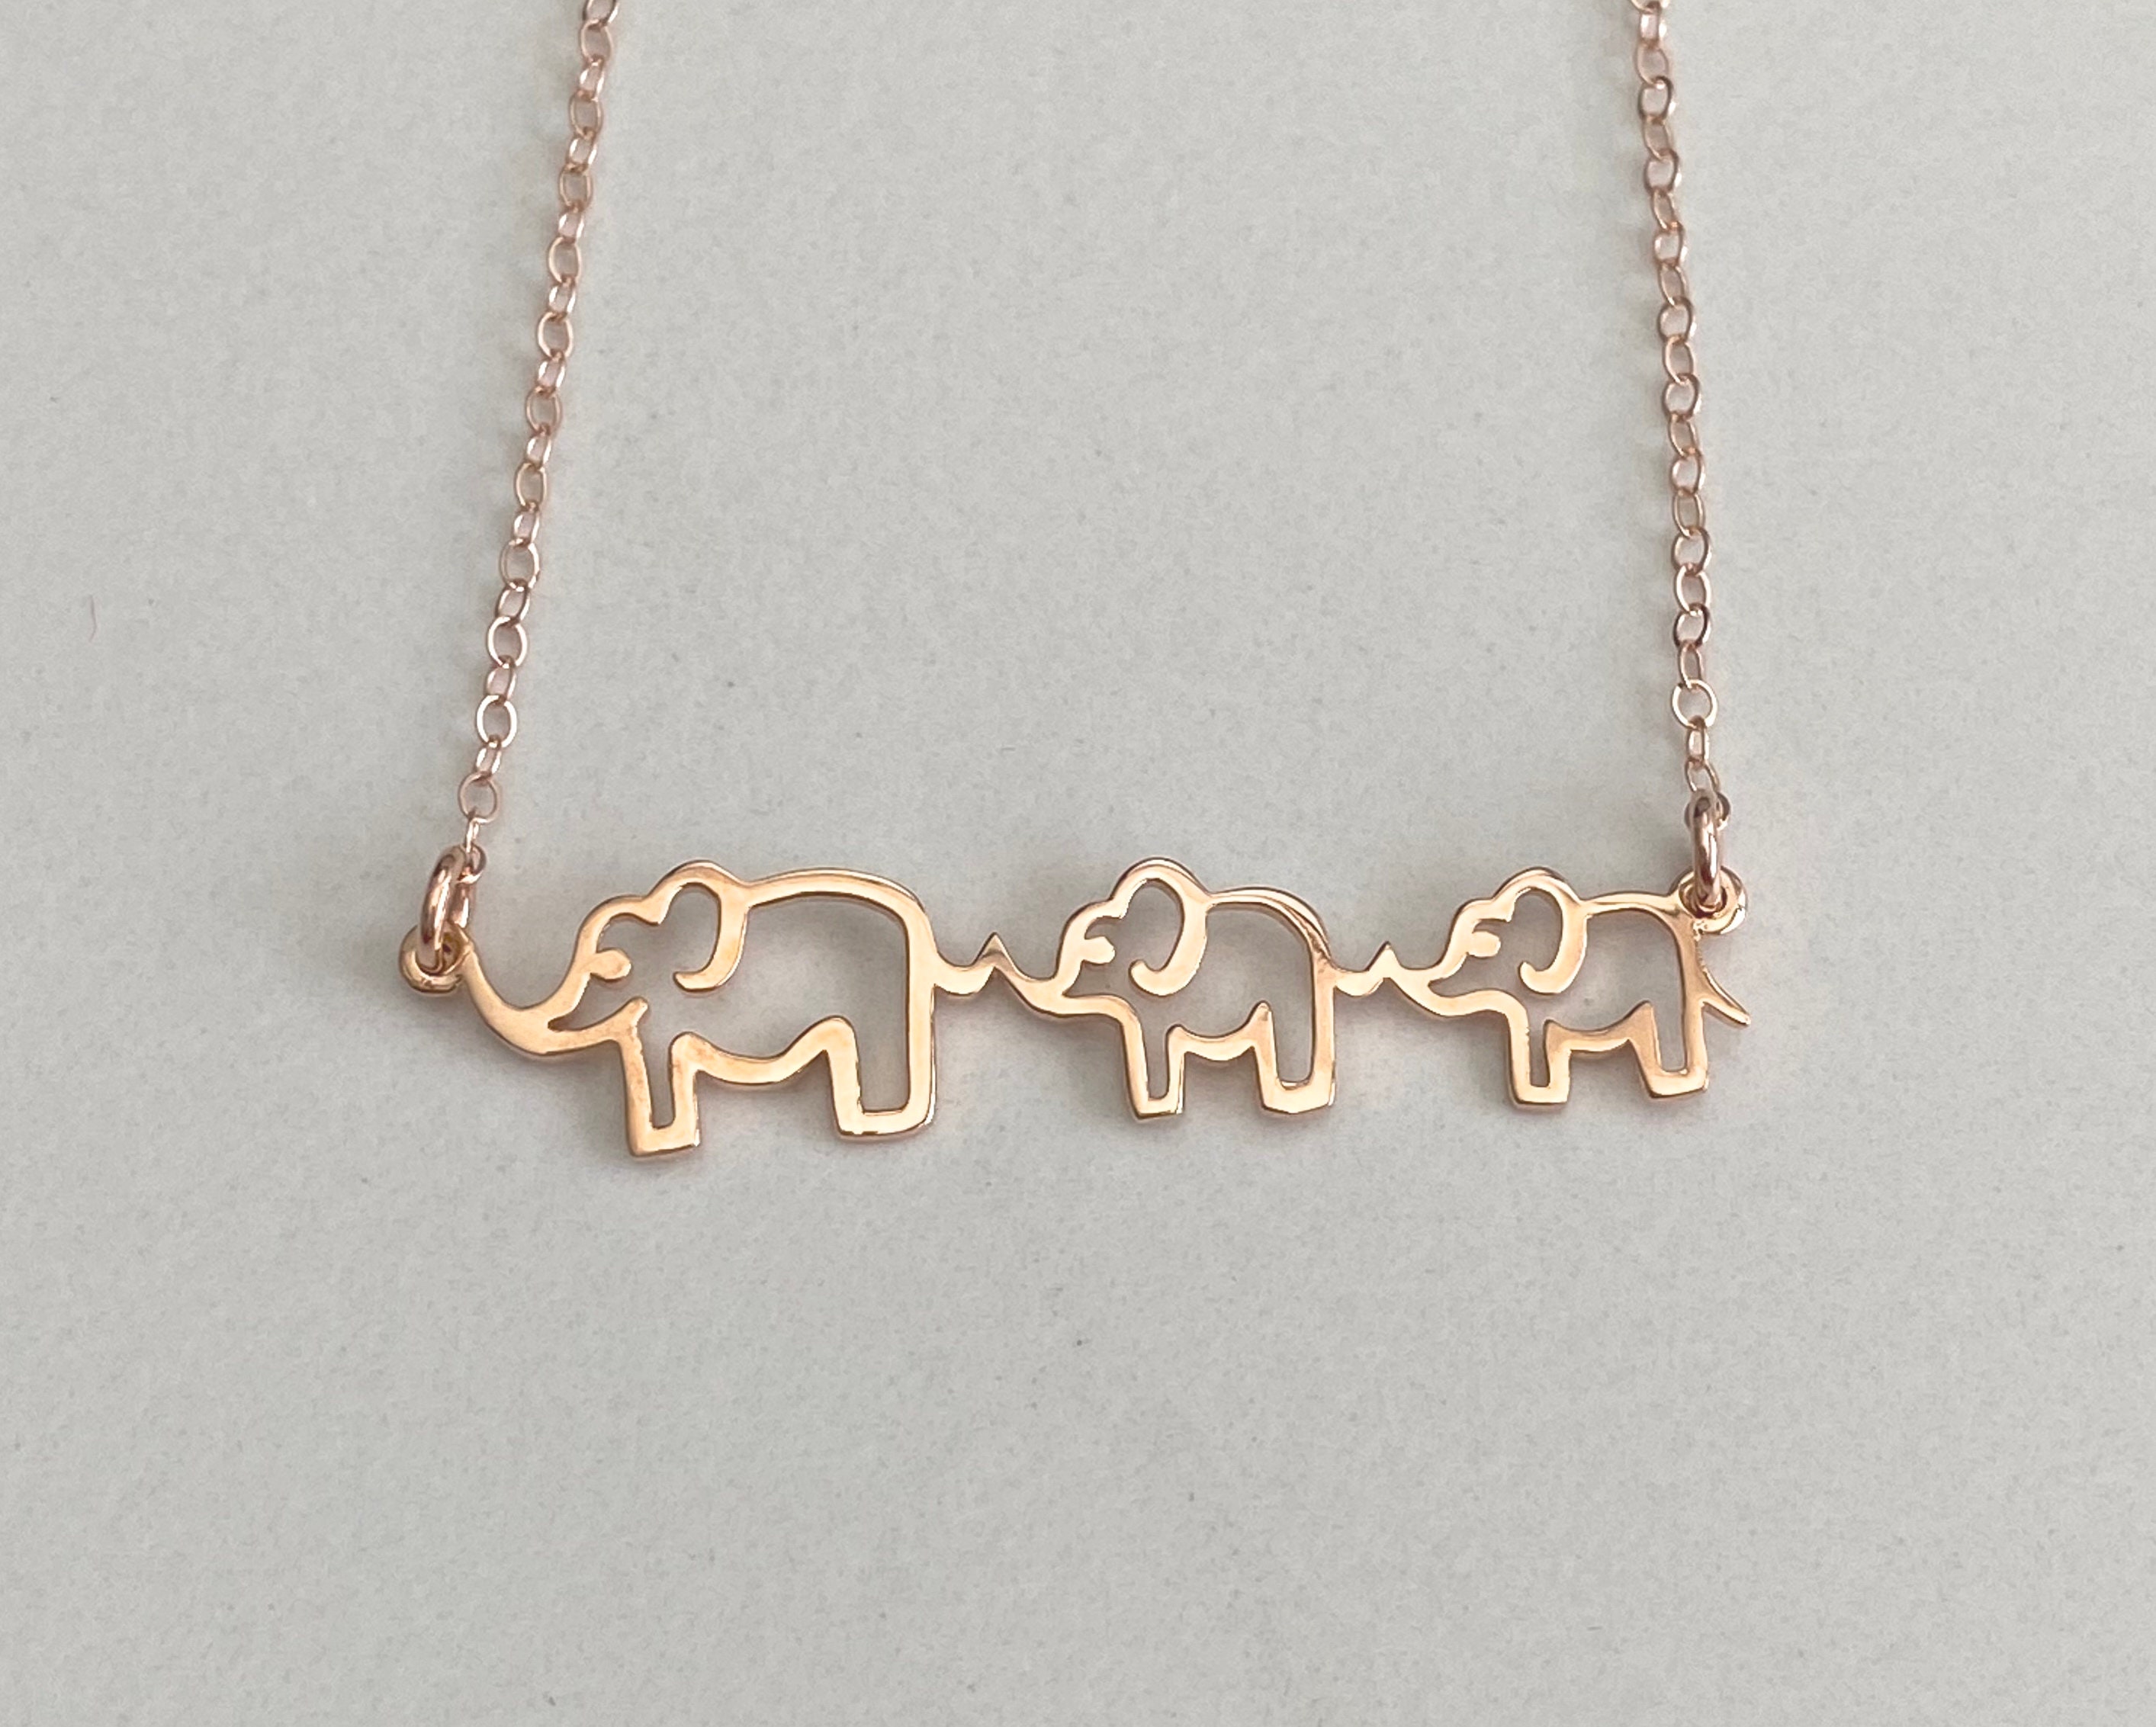 Far Fetched MAMA & BABY ELEPHANT Pendant NECKLACE STERLING Copper Brass 